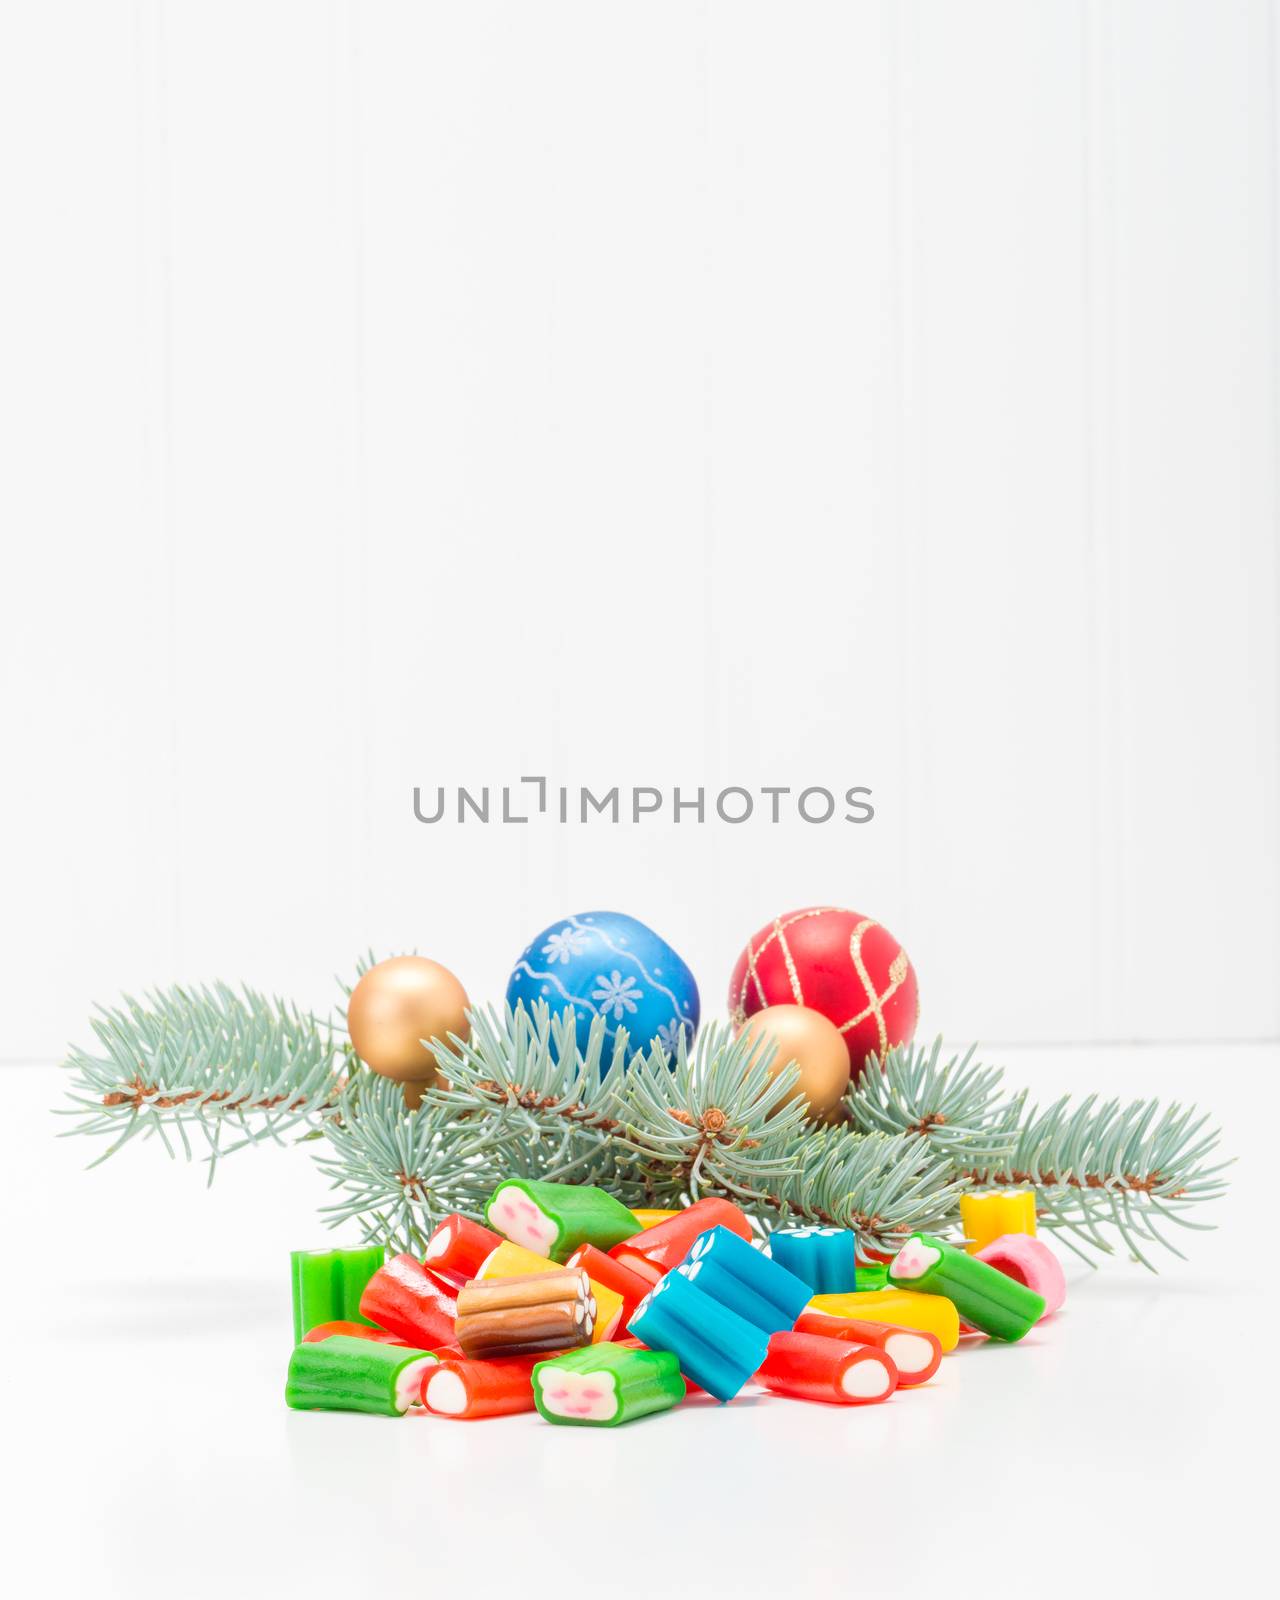 Colorful array of holiday candy in a festive seasonal background.